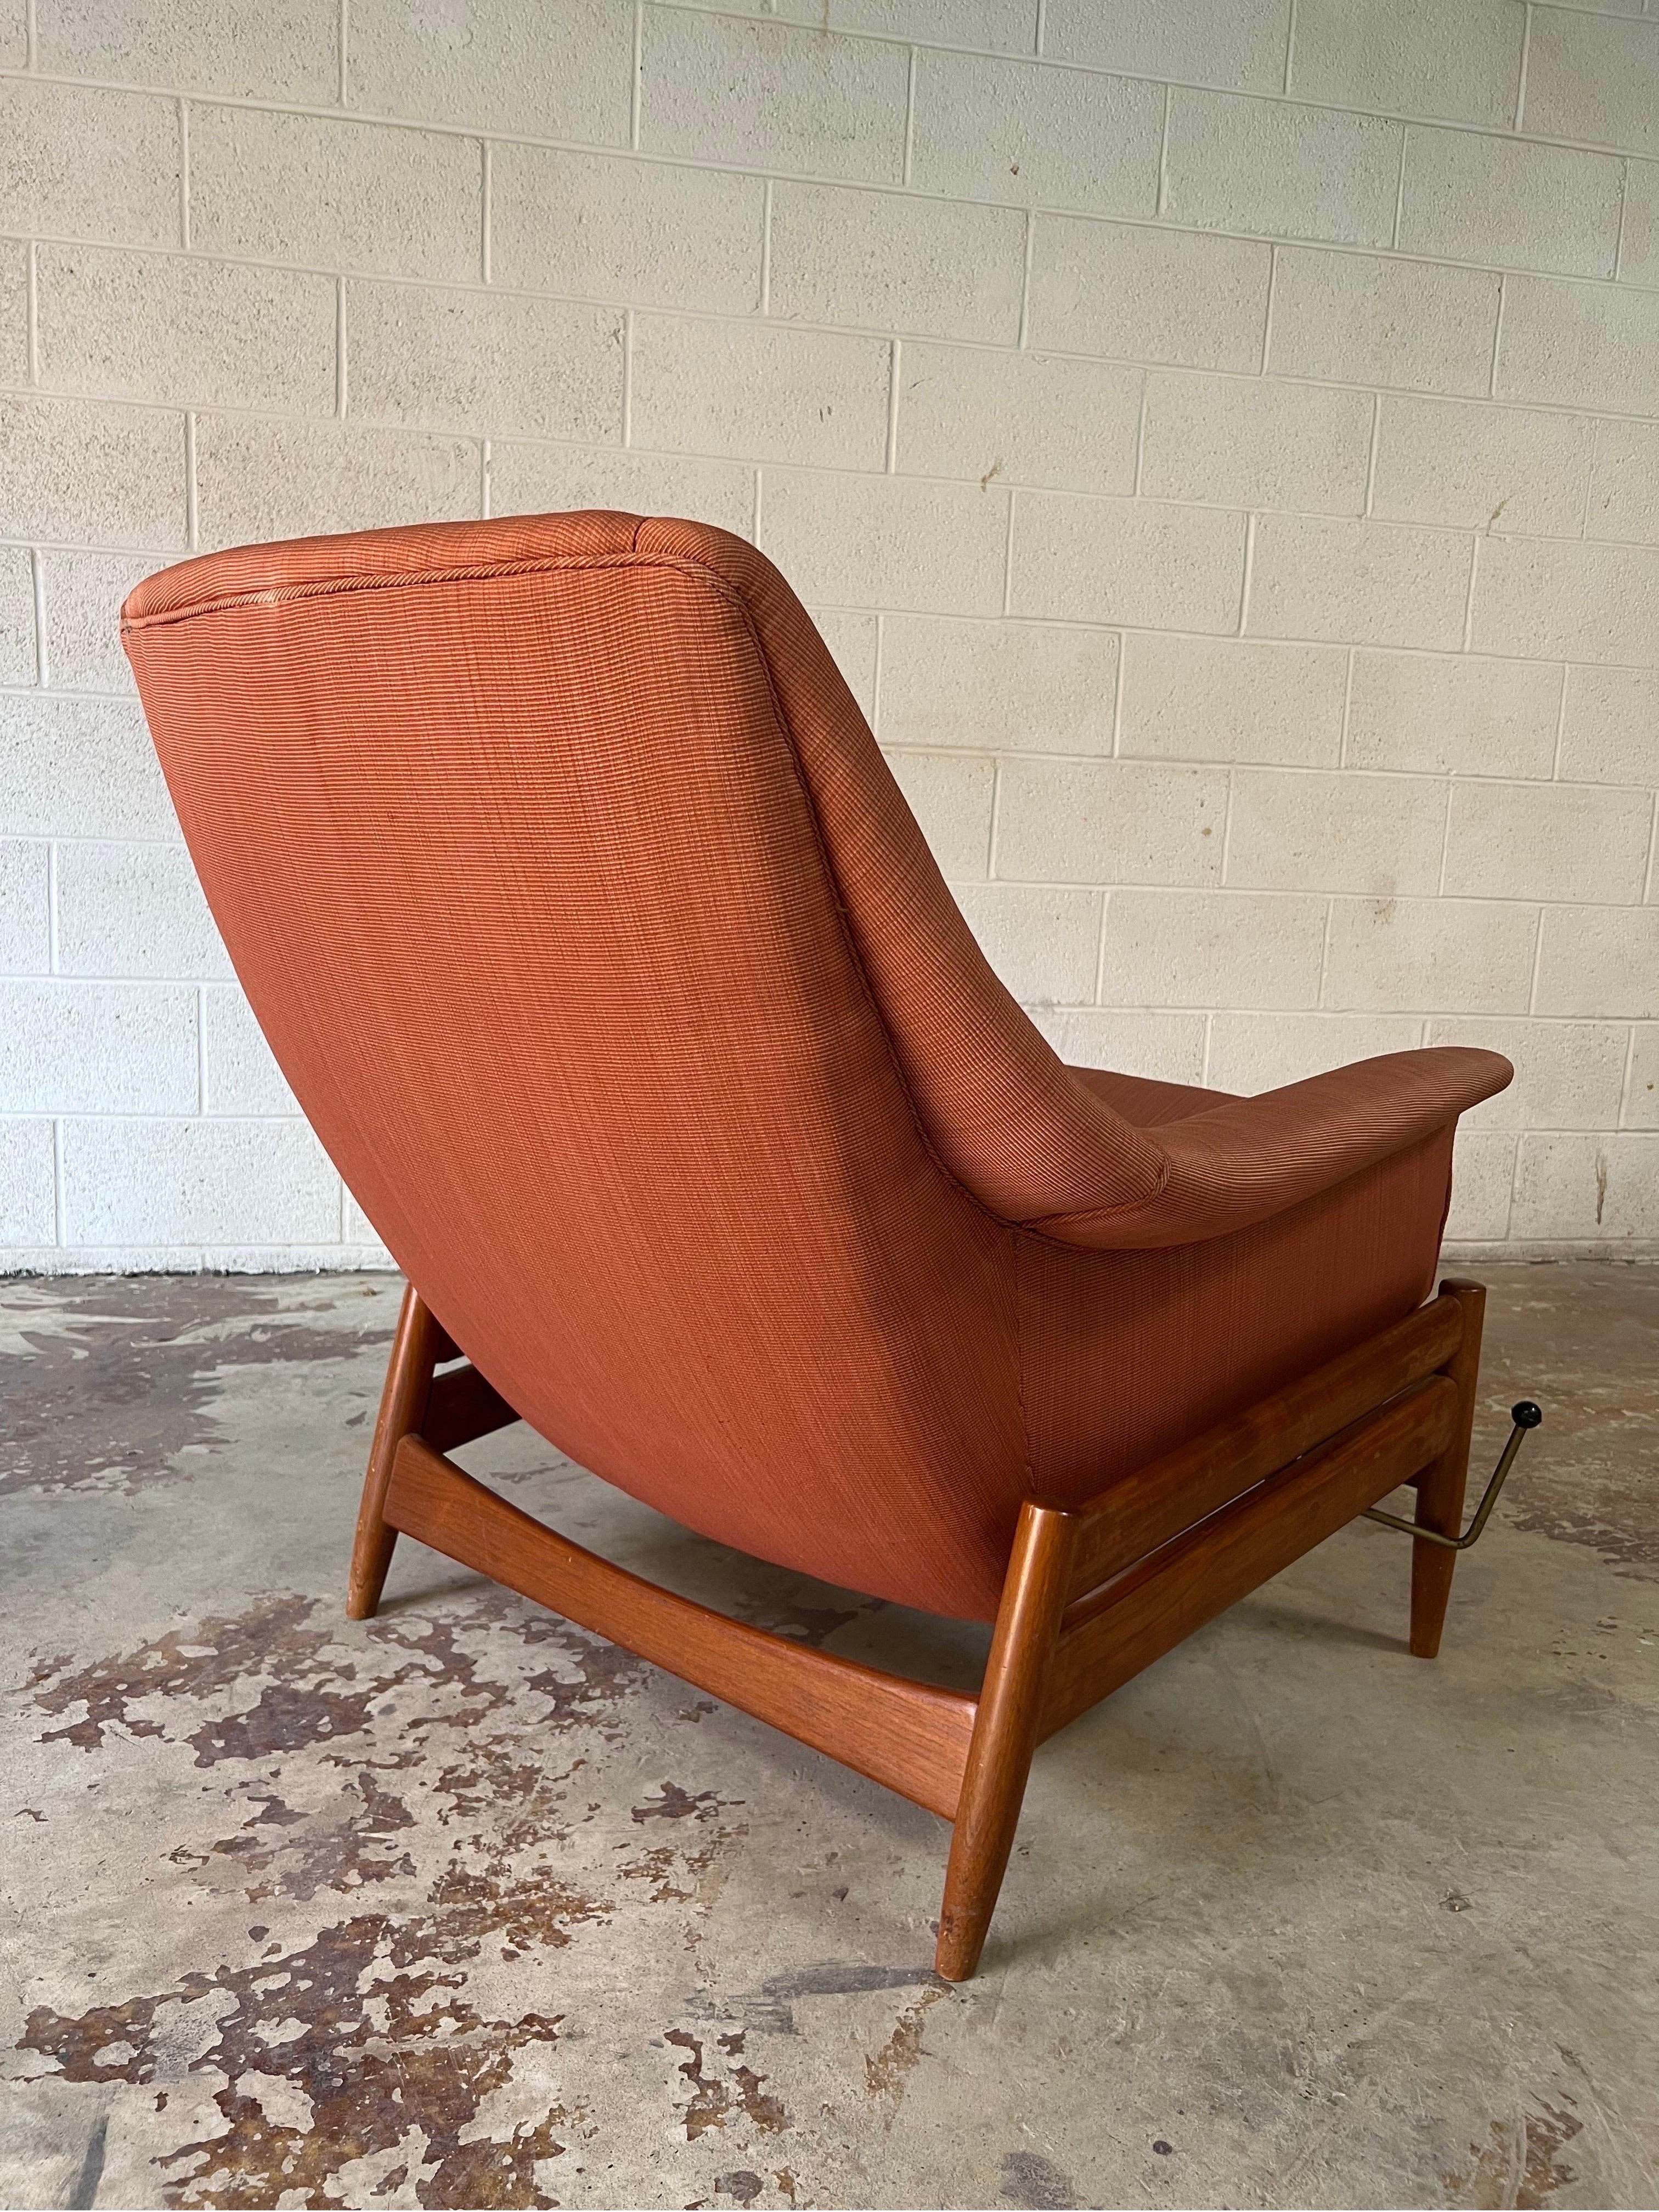 Fabric Recliner by L.K. Hjelle, Norway circa 1960’s